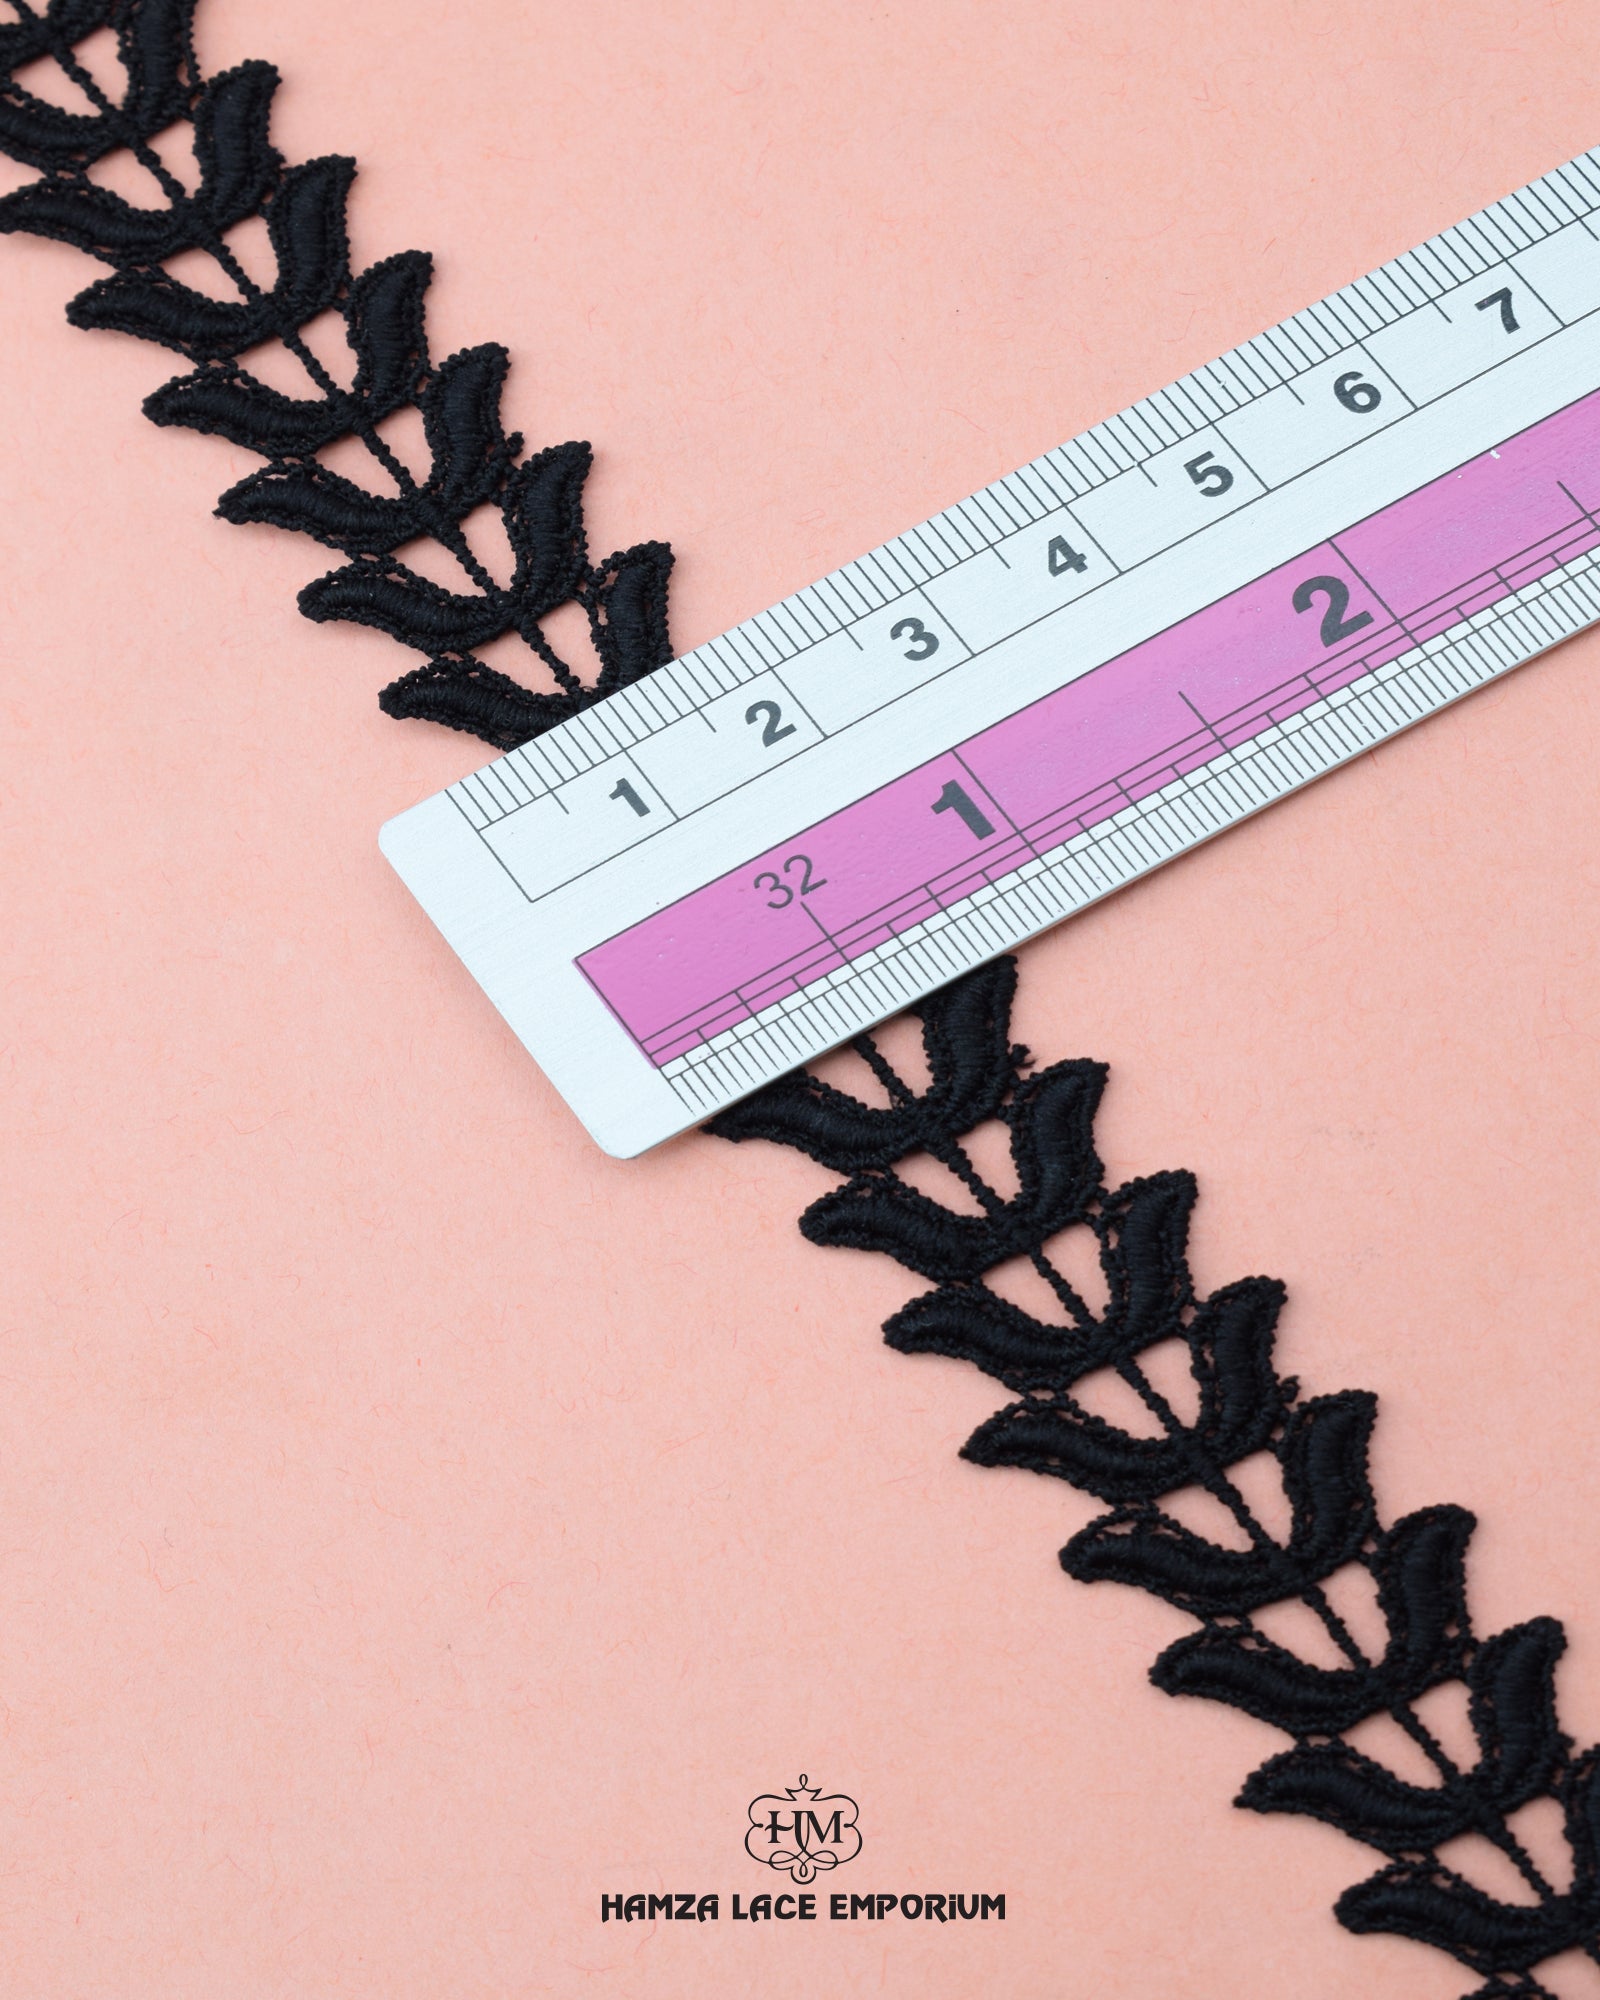 The size of the 'Center Filling Lace 5426' is given with the help of a ruler.